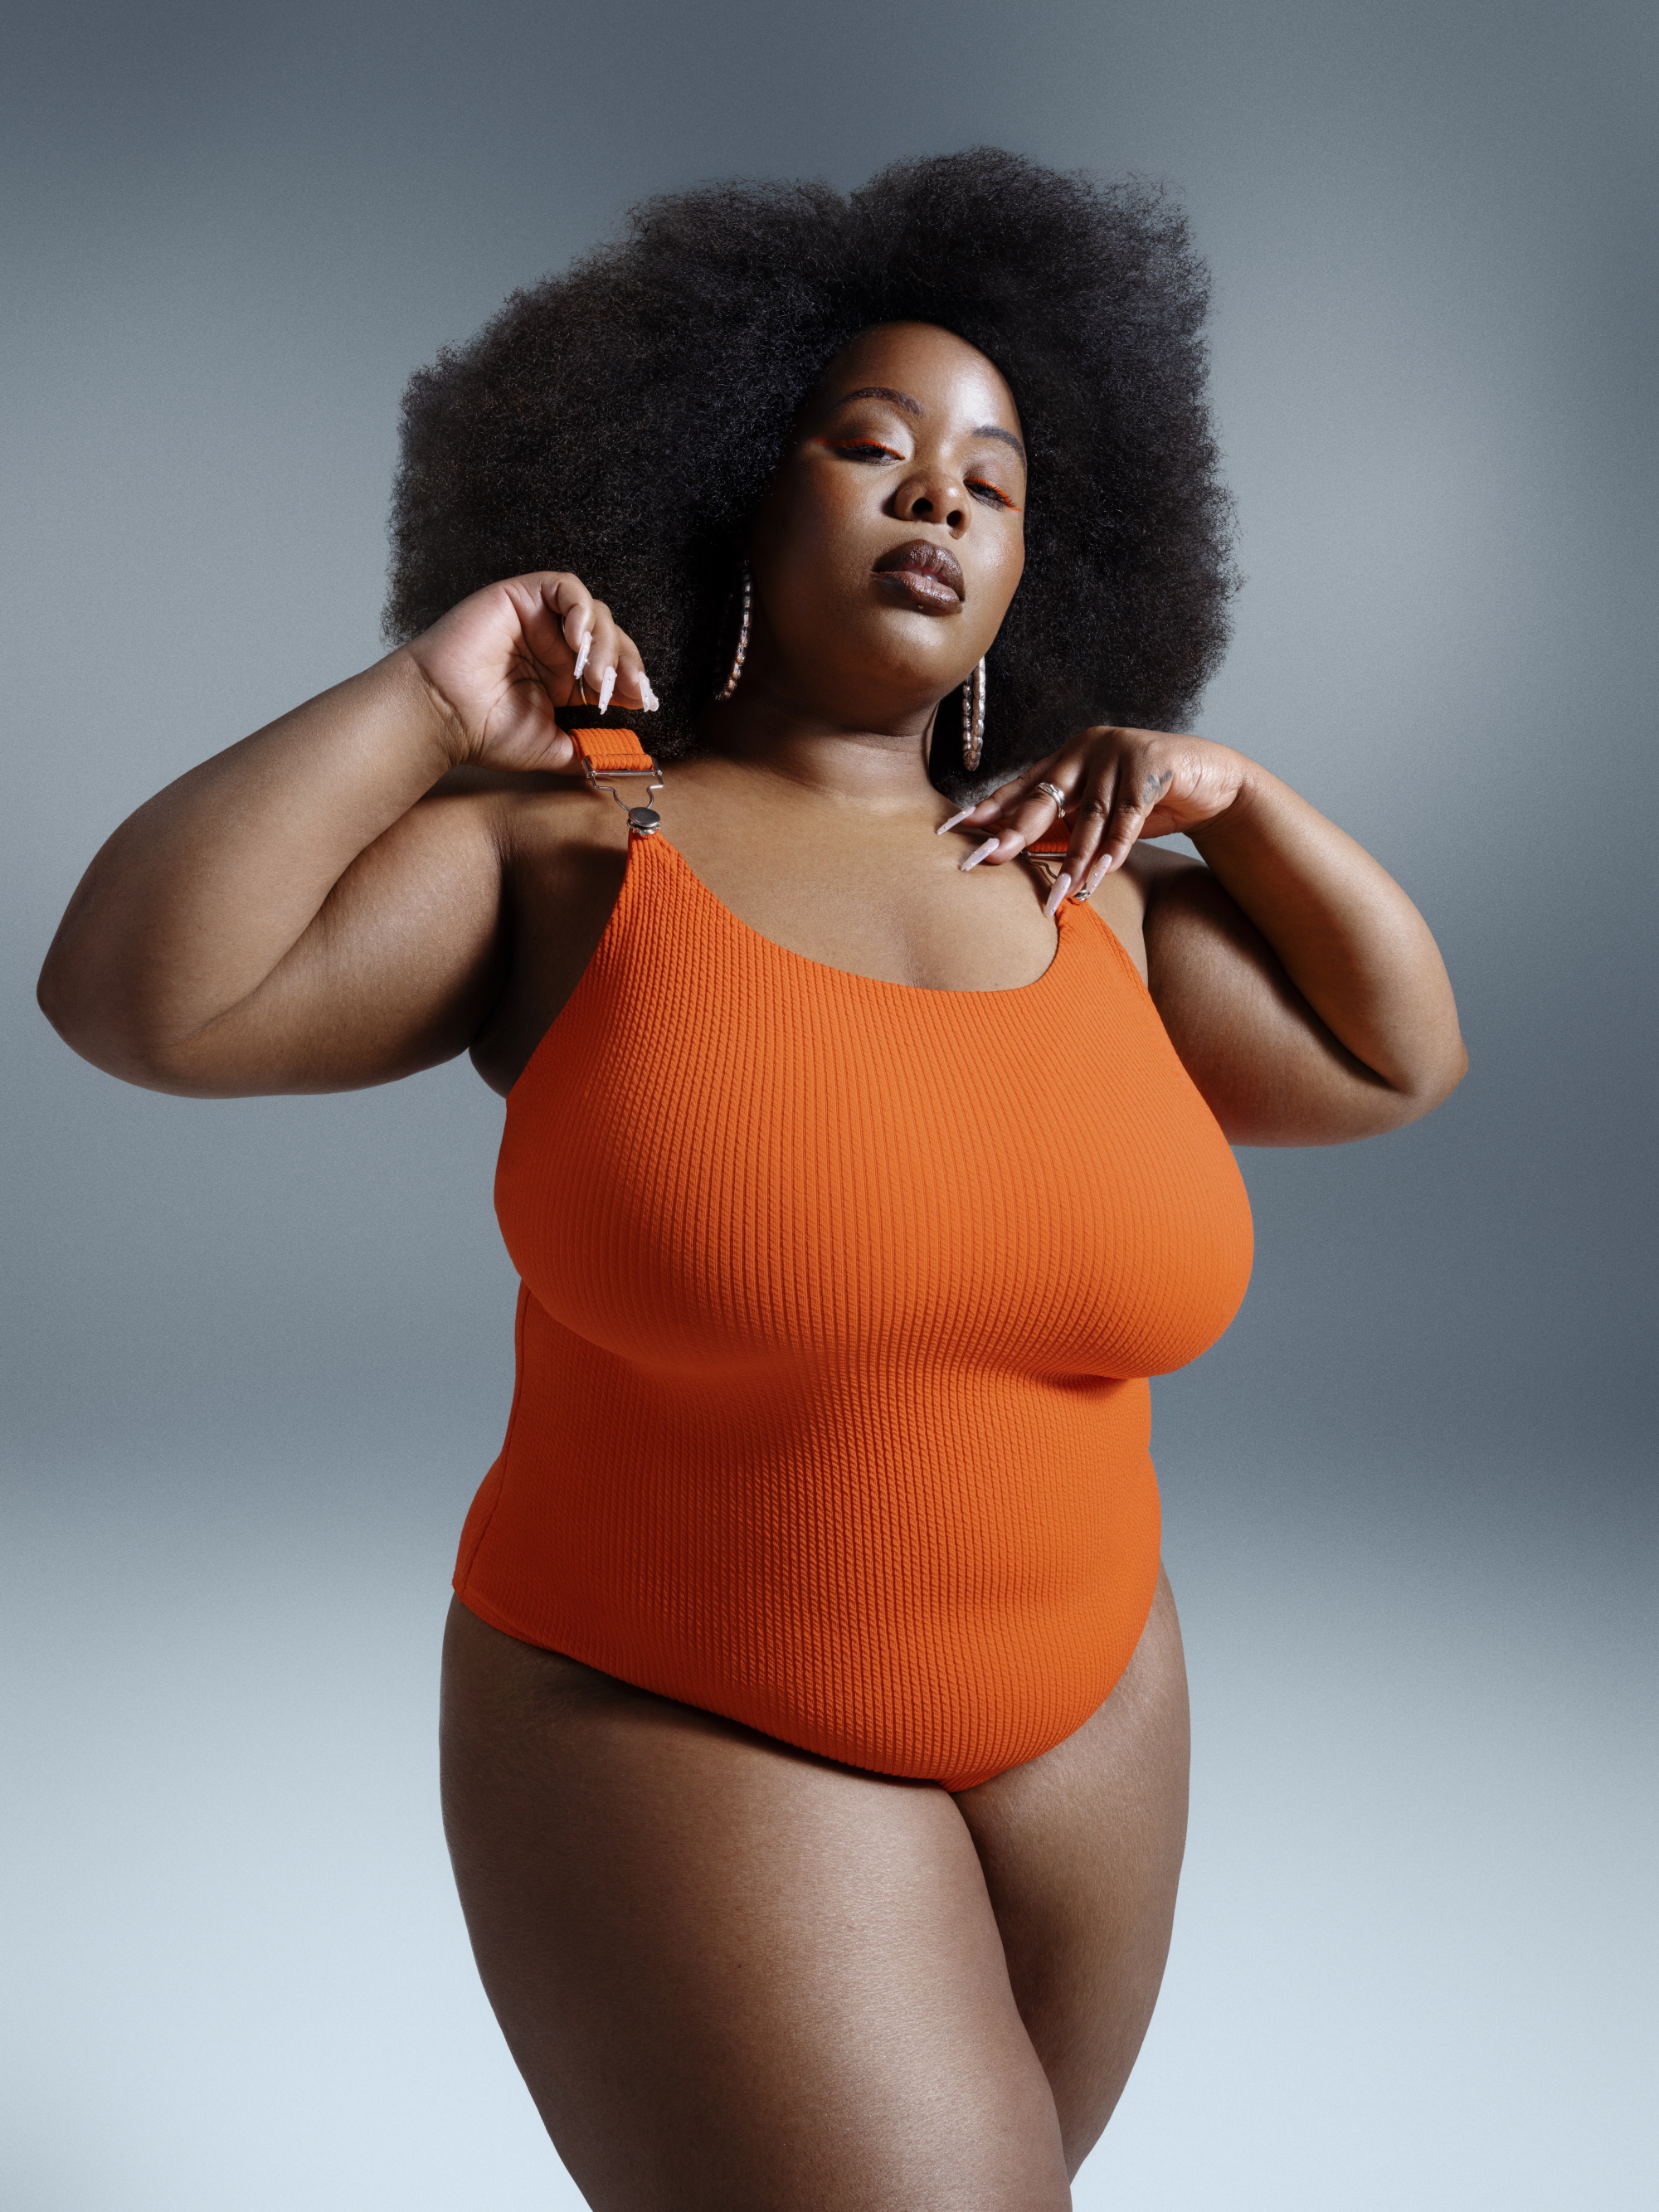 Simply Be launches “Serious About Shape” by House 337